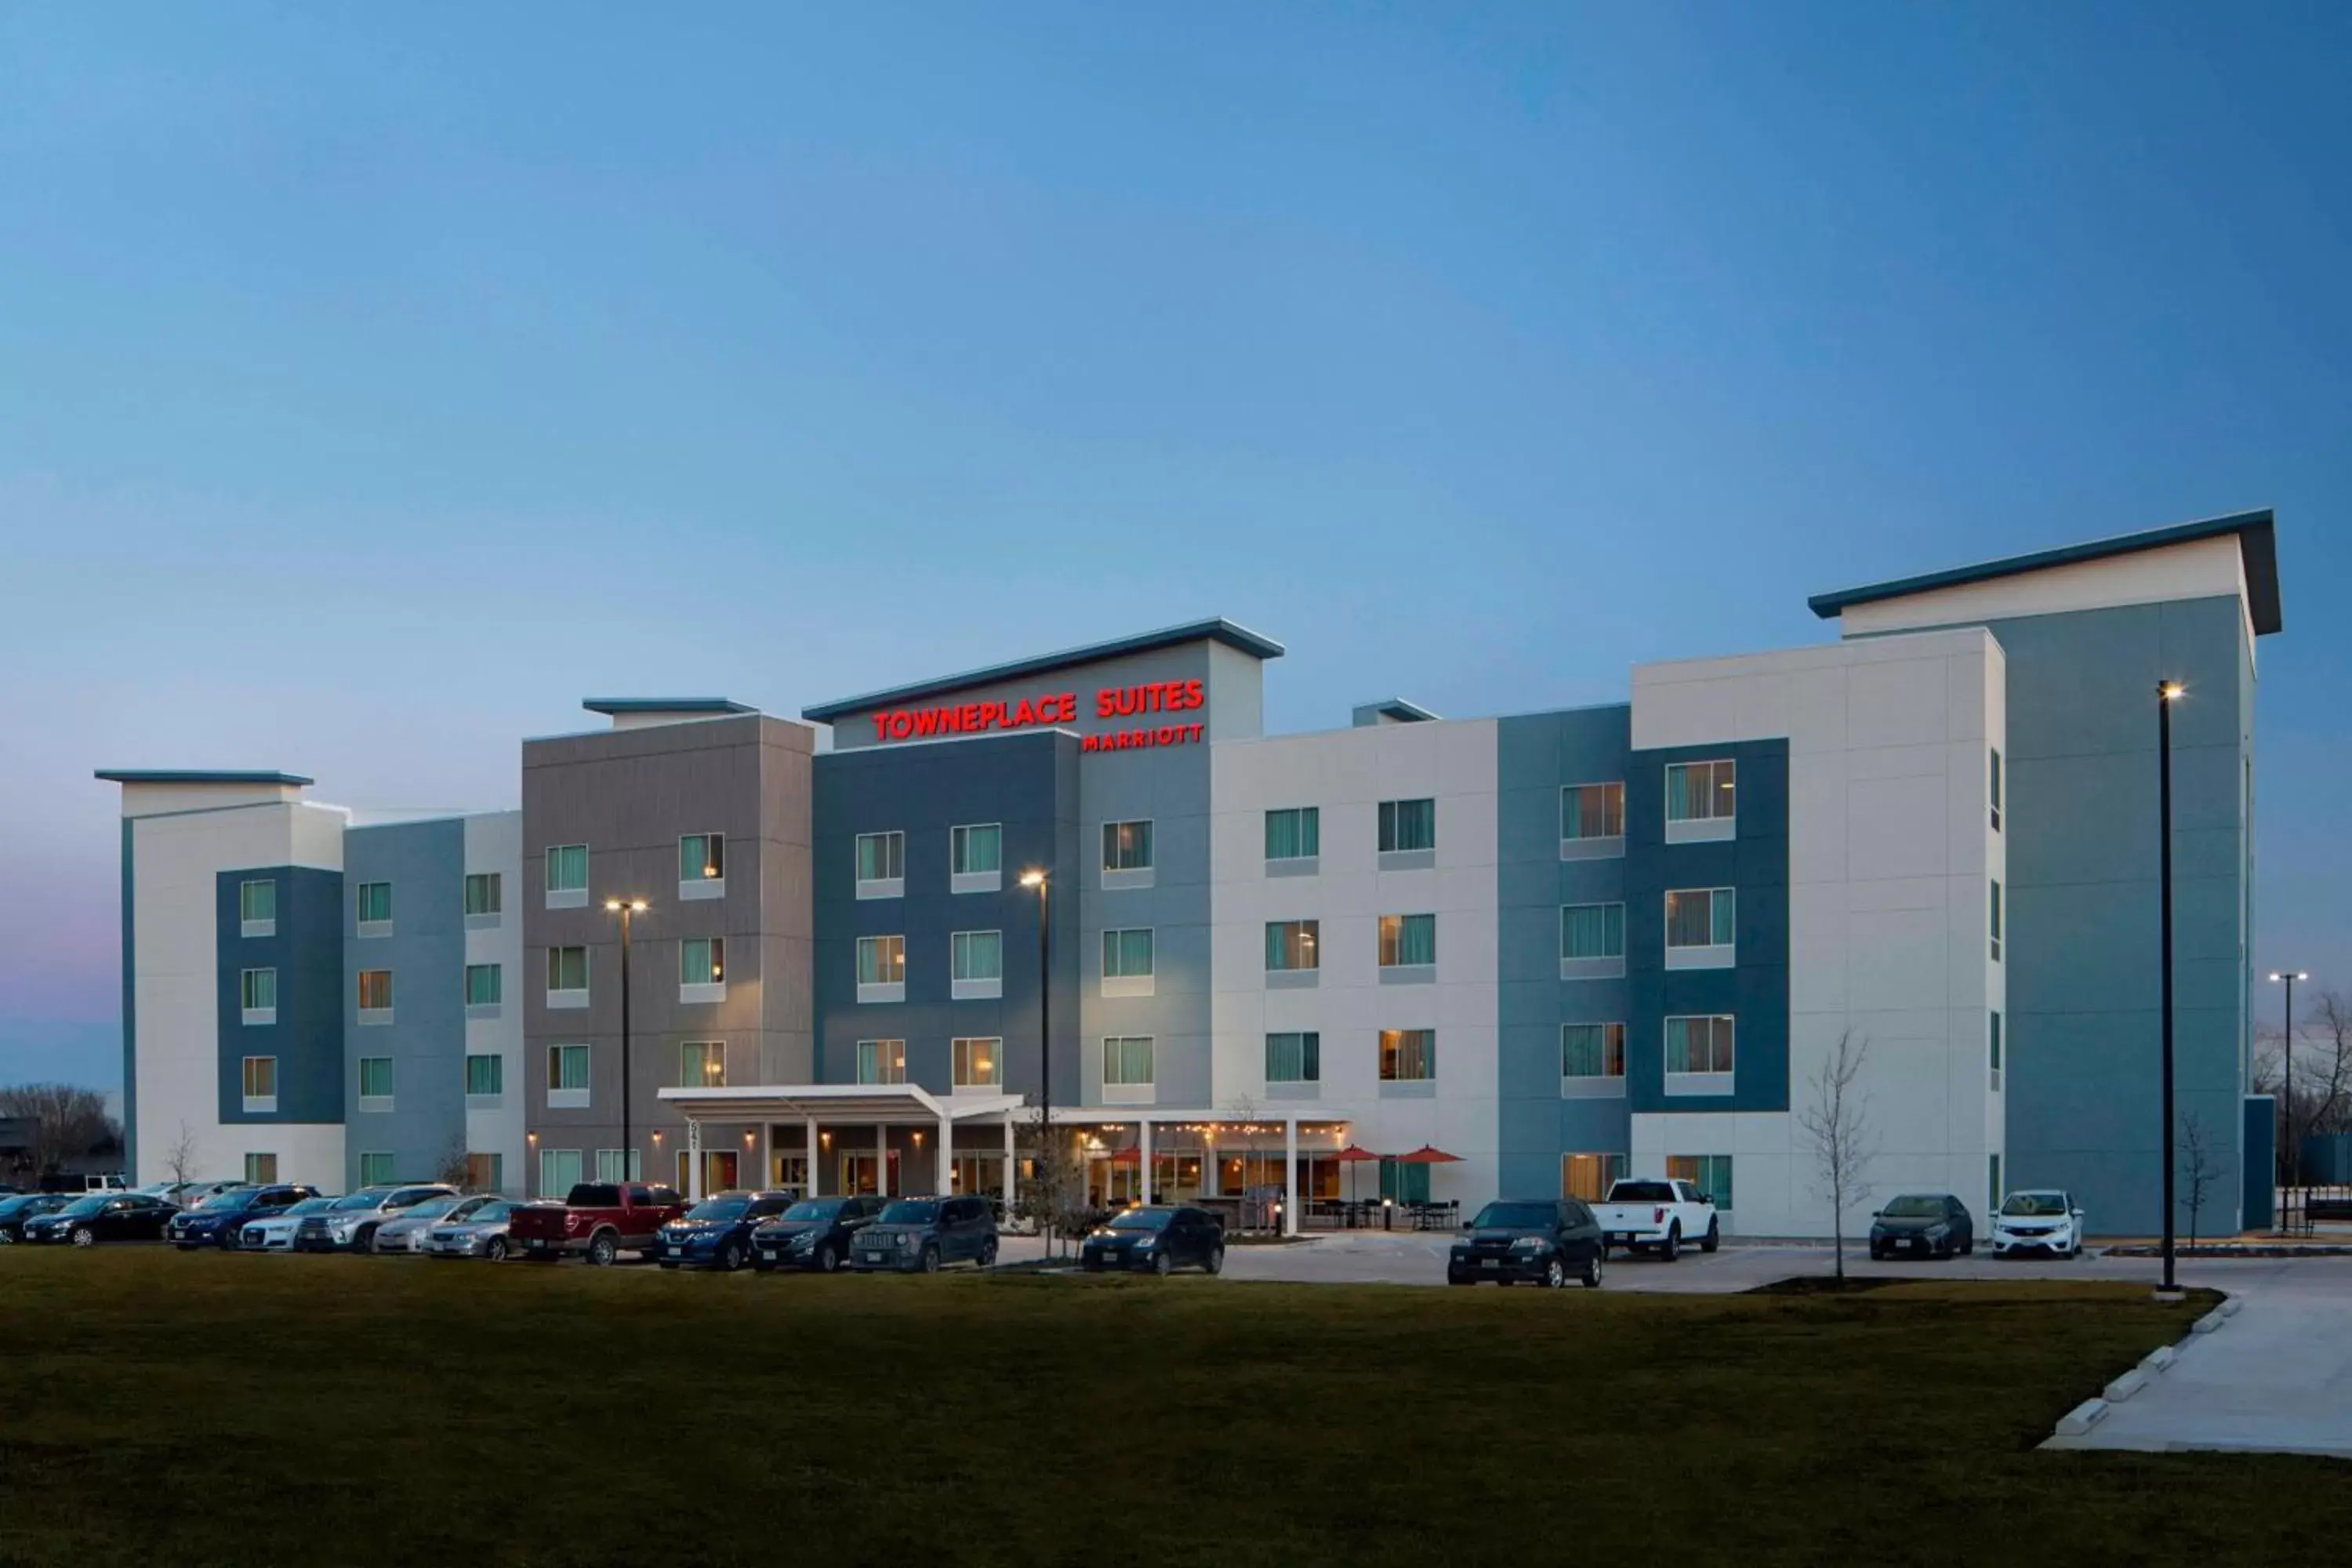 Property Building in TownePlace Suites by Marriott Austin Round Rock